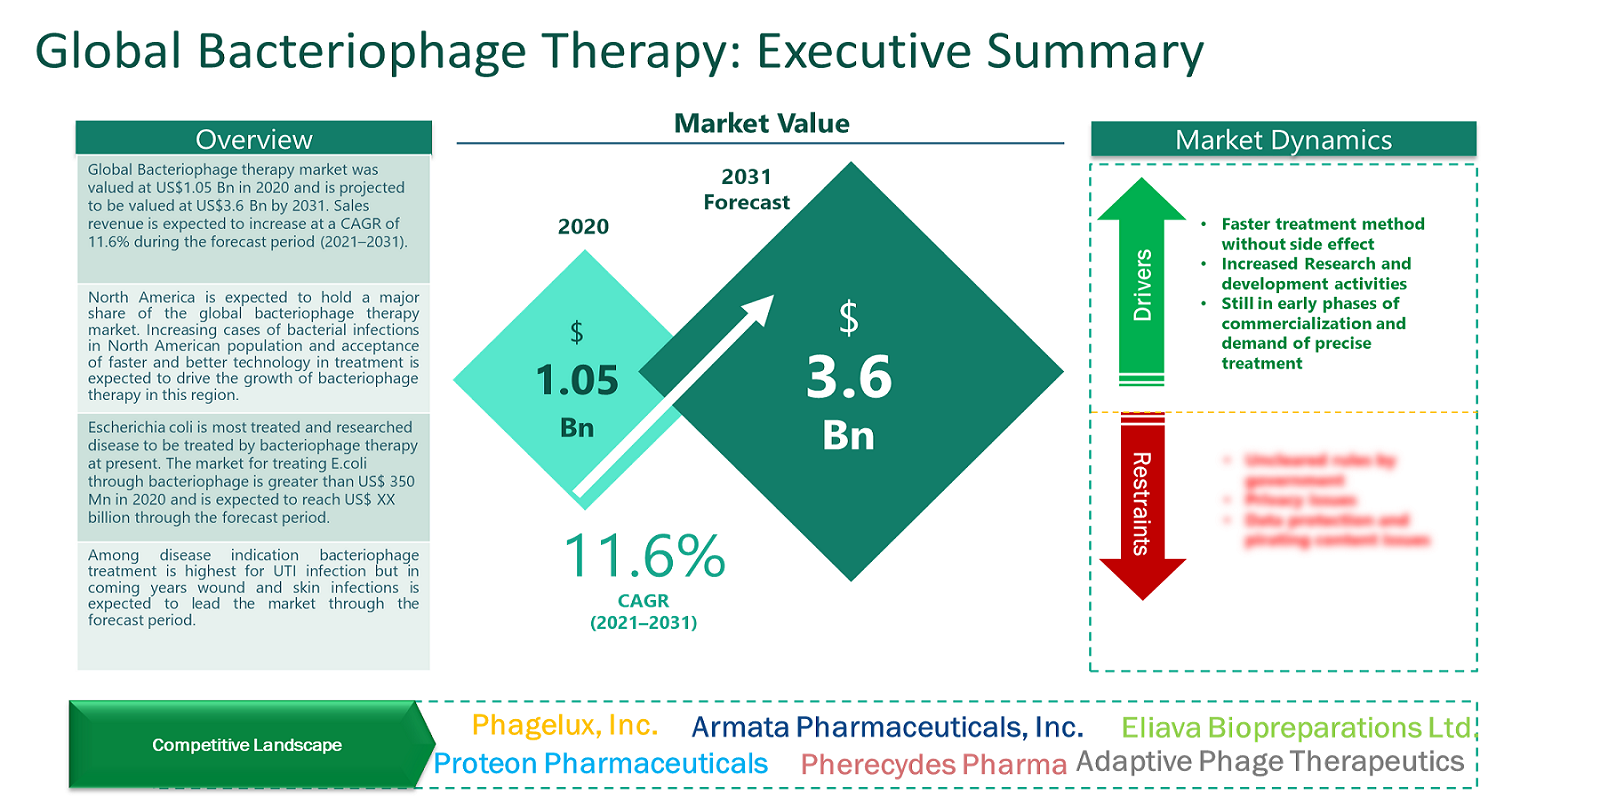 Bacteriophages Therapy Market